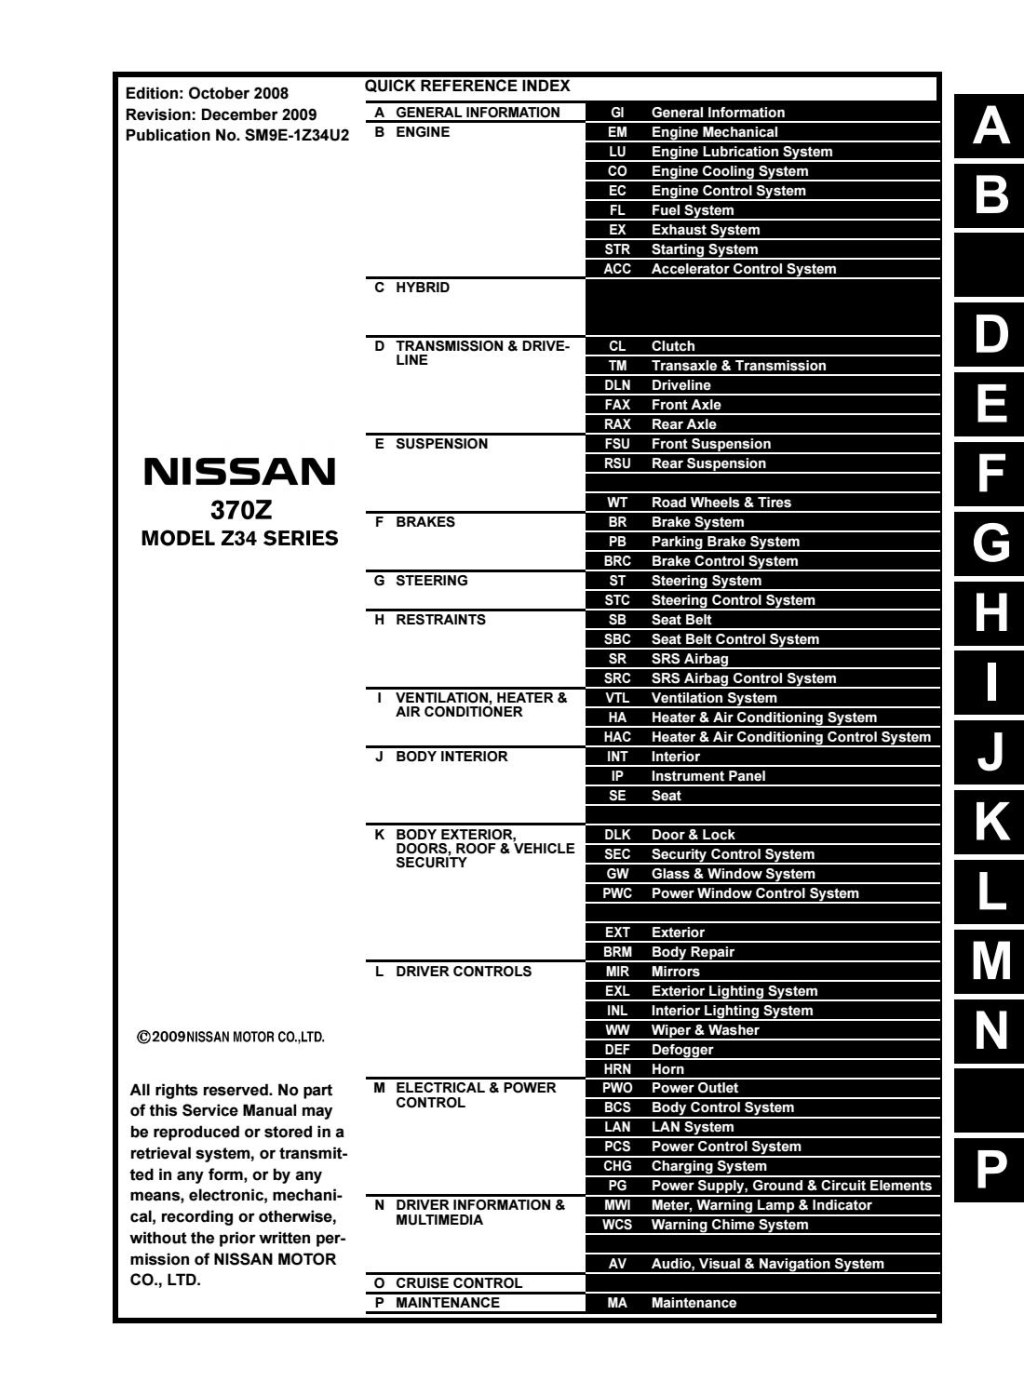 Picture of: Nissan Z Service Repair Manual by  – Issuu